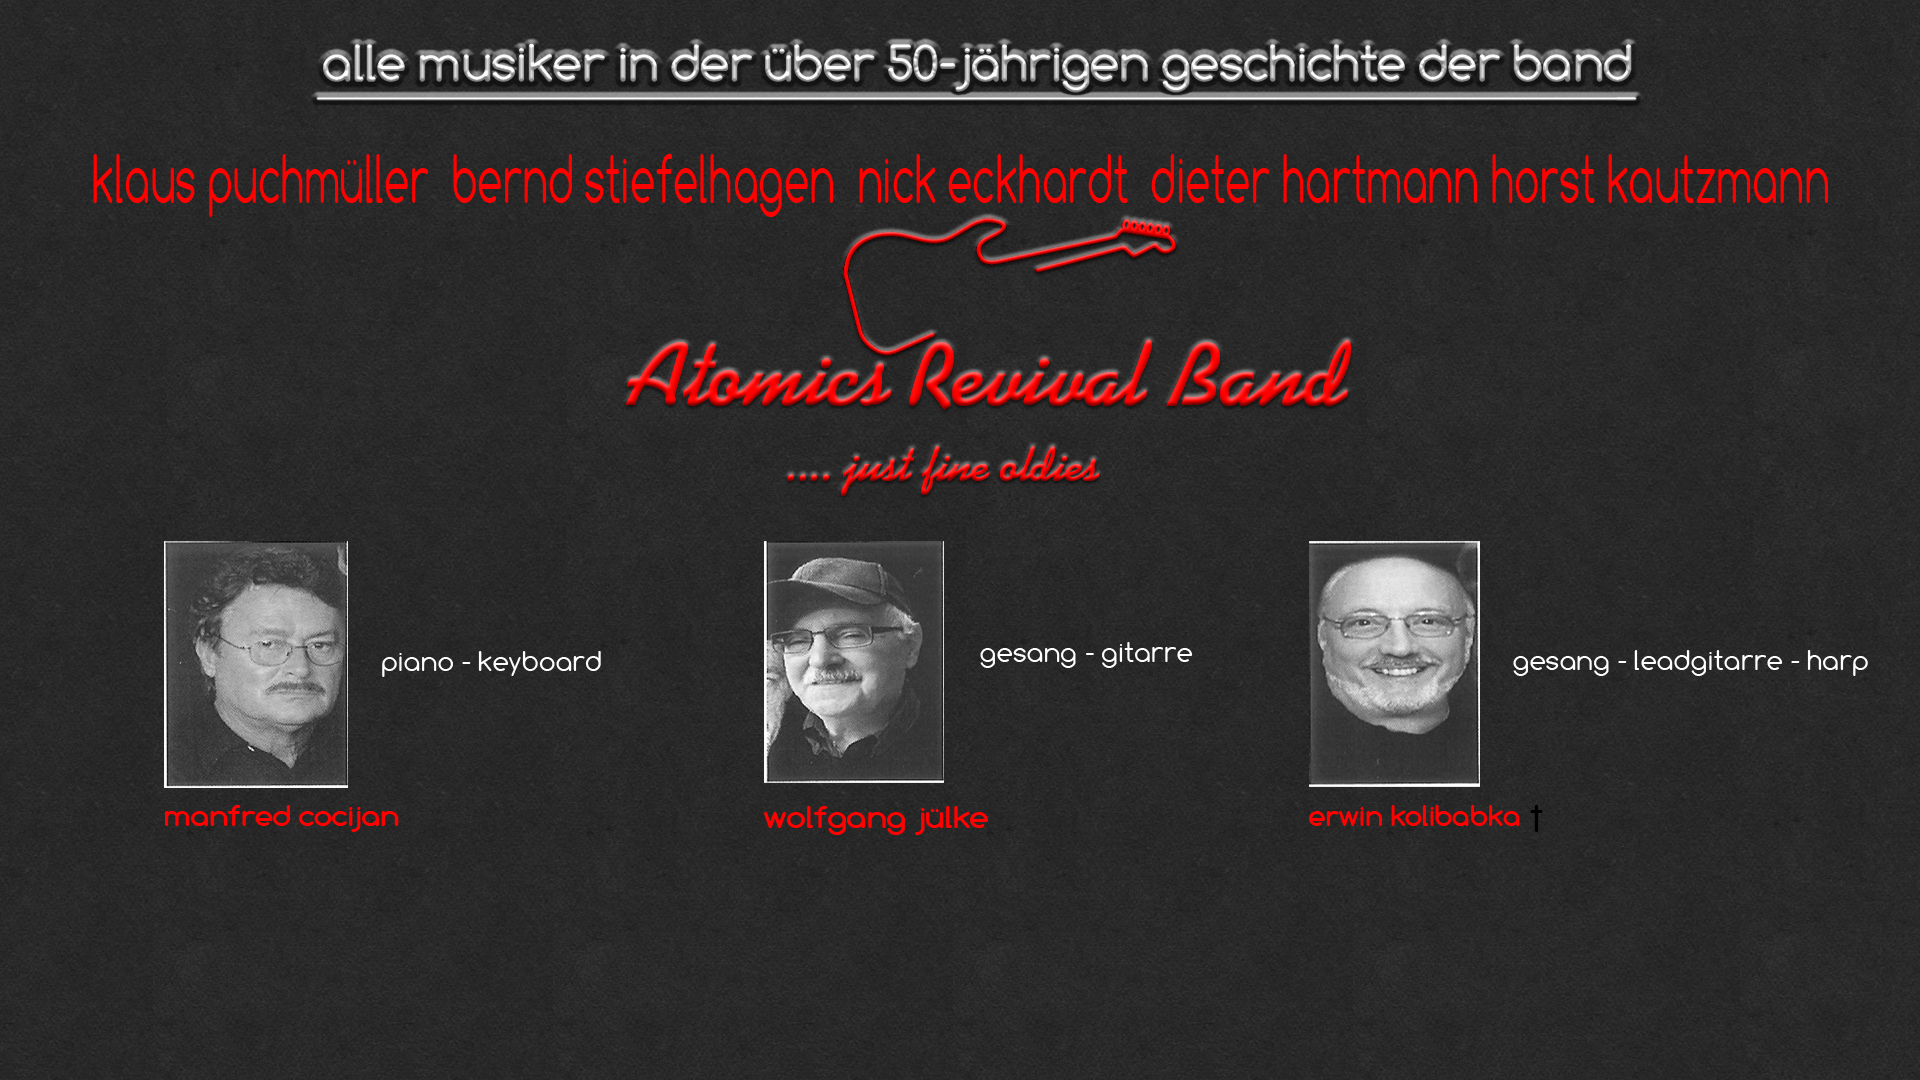 Atomics-Revival-Band ...just fine oldies